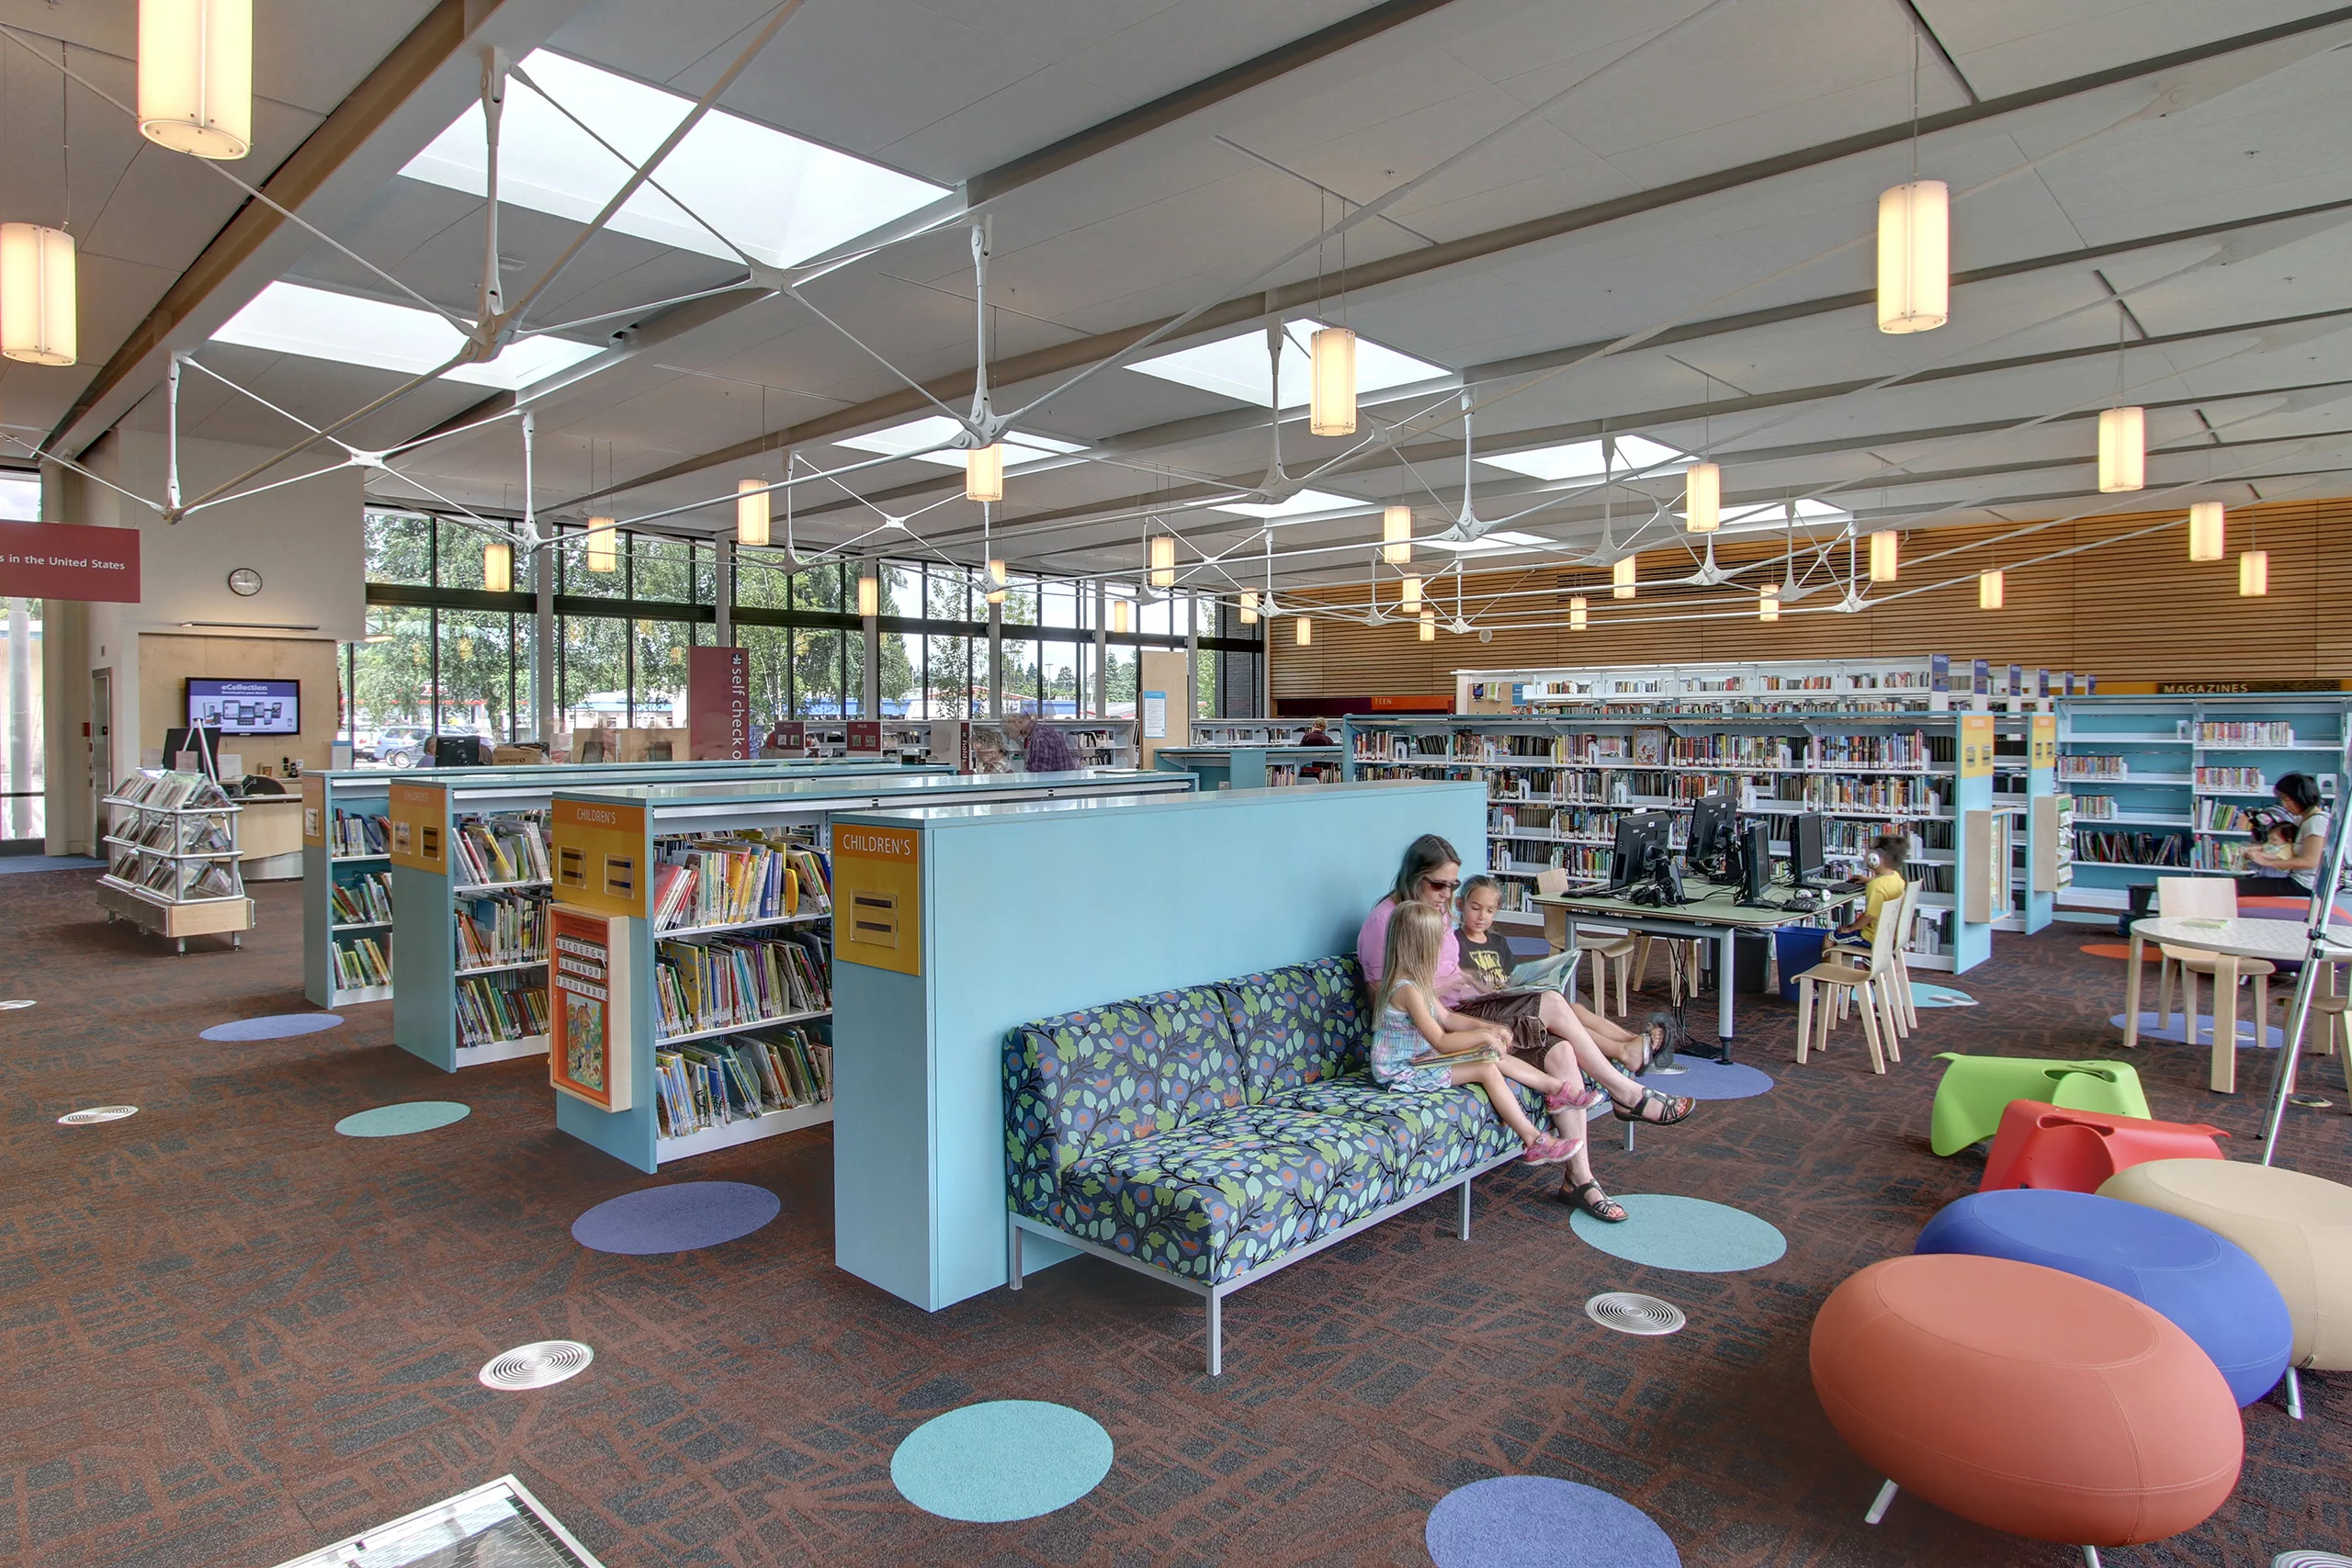 Interior daylight view of the children's reading room at the Kenmore Library featuring bookcases, sofas, children and adults reading, computer stations, and skylights